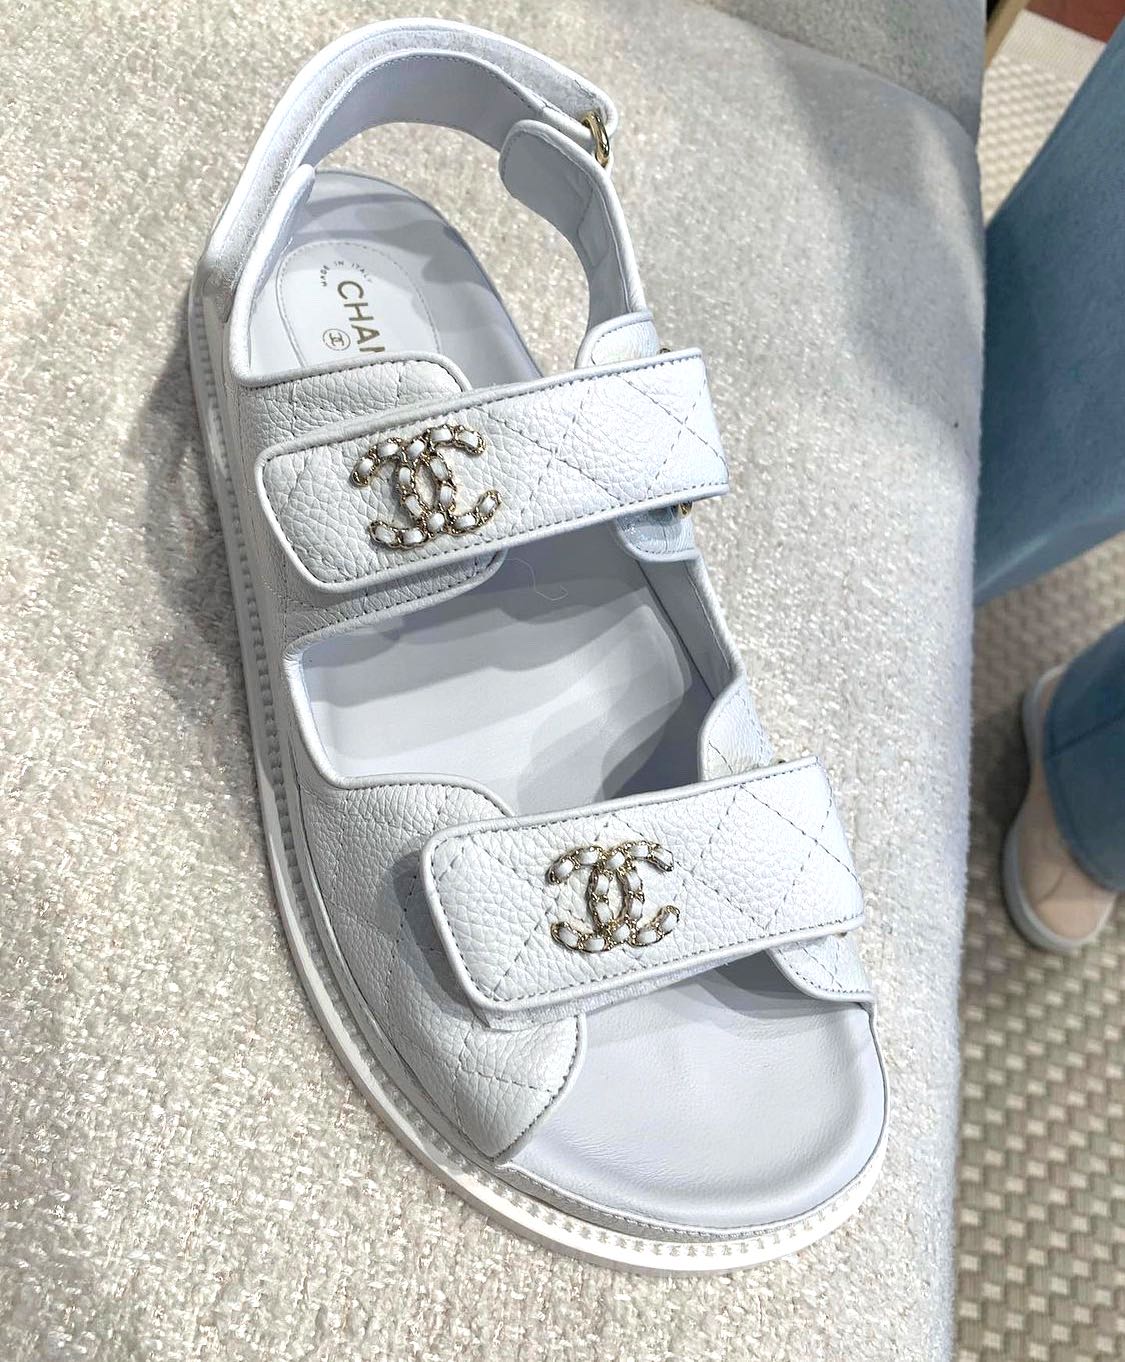 Brand New Chanel Dad Sandals White Size  and 40. Chanel Sandals White.,  Women's Fashion, Footwear, Flats & Sandals on Carousell